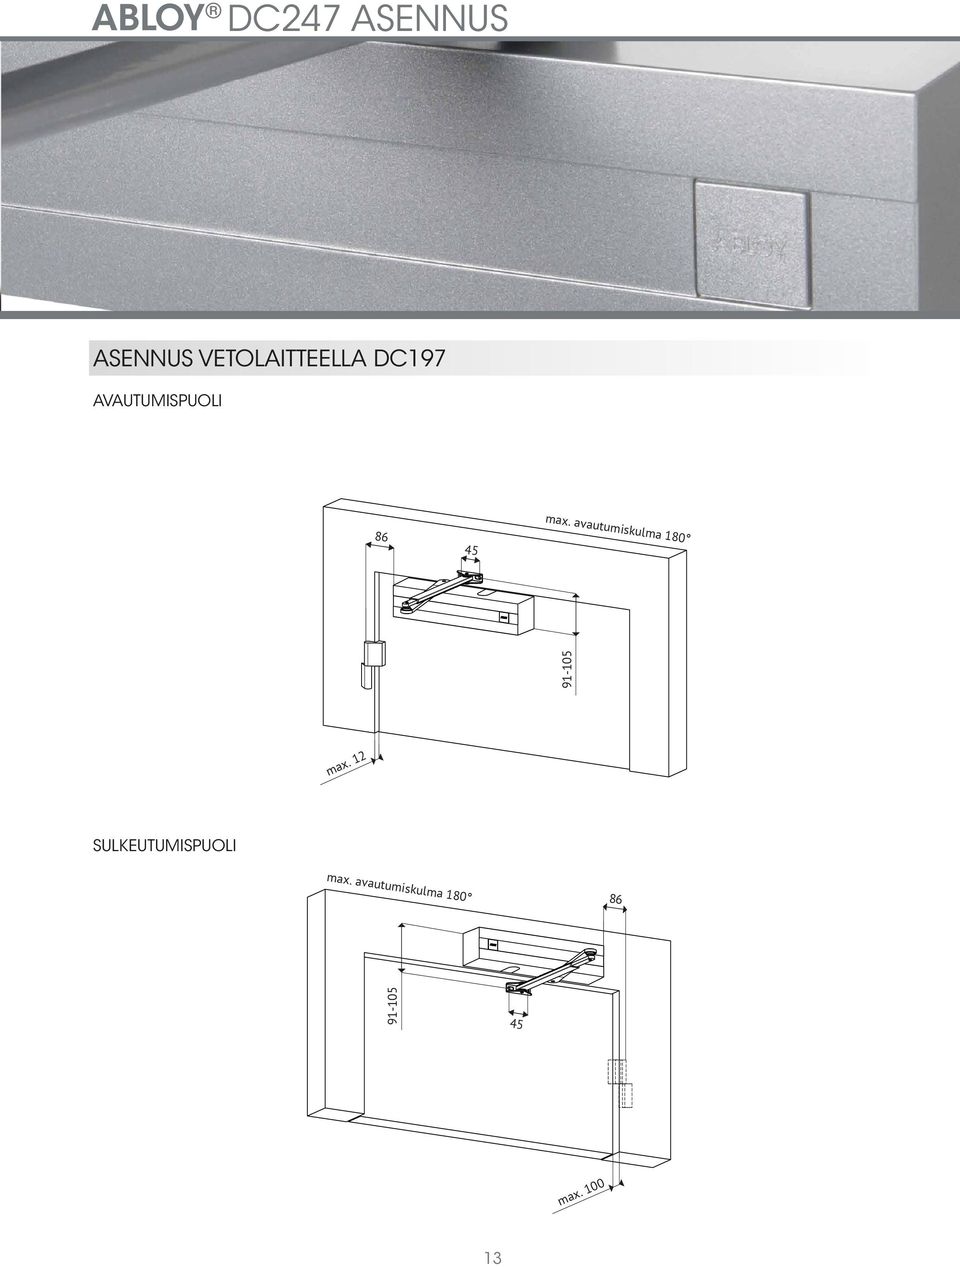 avautumiskulma 180 DC240 INSTALLATION INSTALLATION WITH ARMS DC190, DC191, DC199 HINGE SIDE, DOOR INSTALLATION MAX.